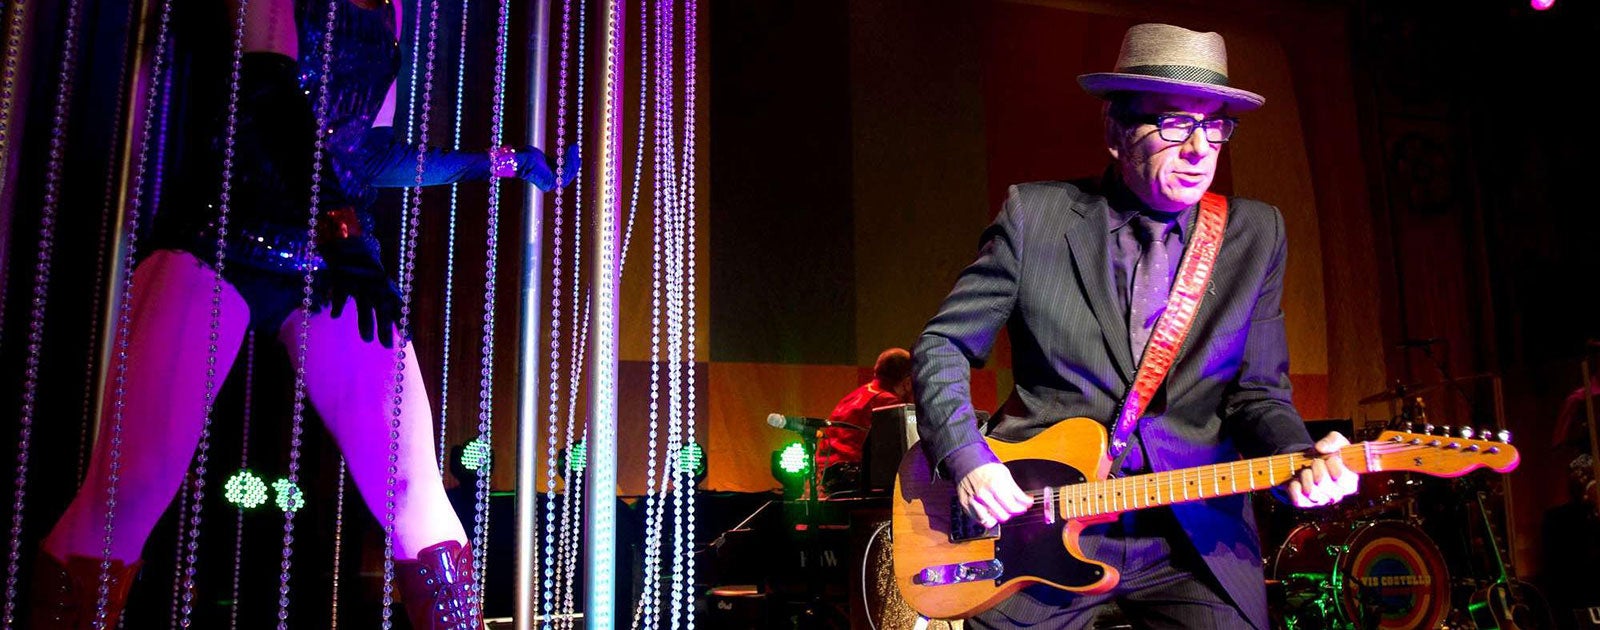 Elvis Costello & The Imposters 